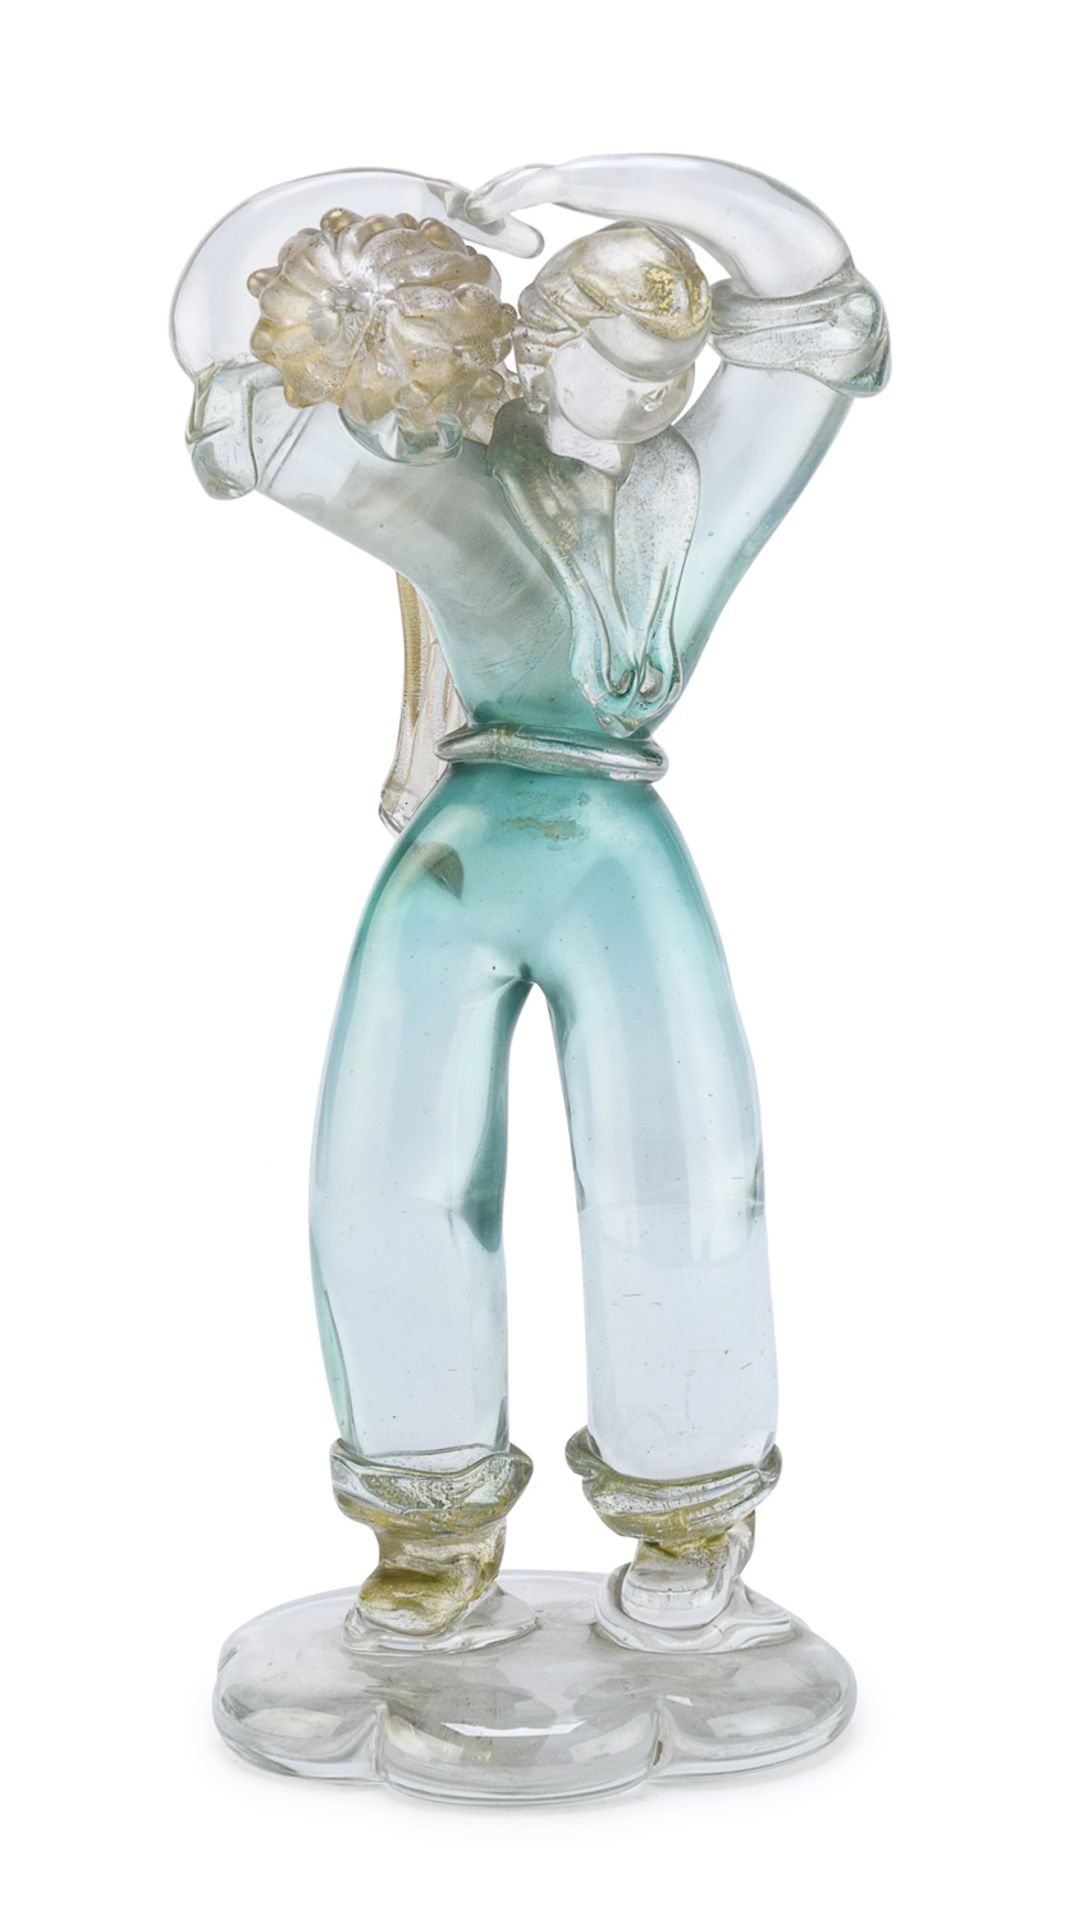 GLASS SCULPTURE GINO CENEDESE 1950s